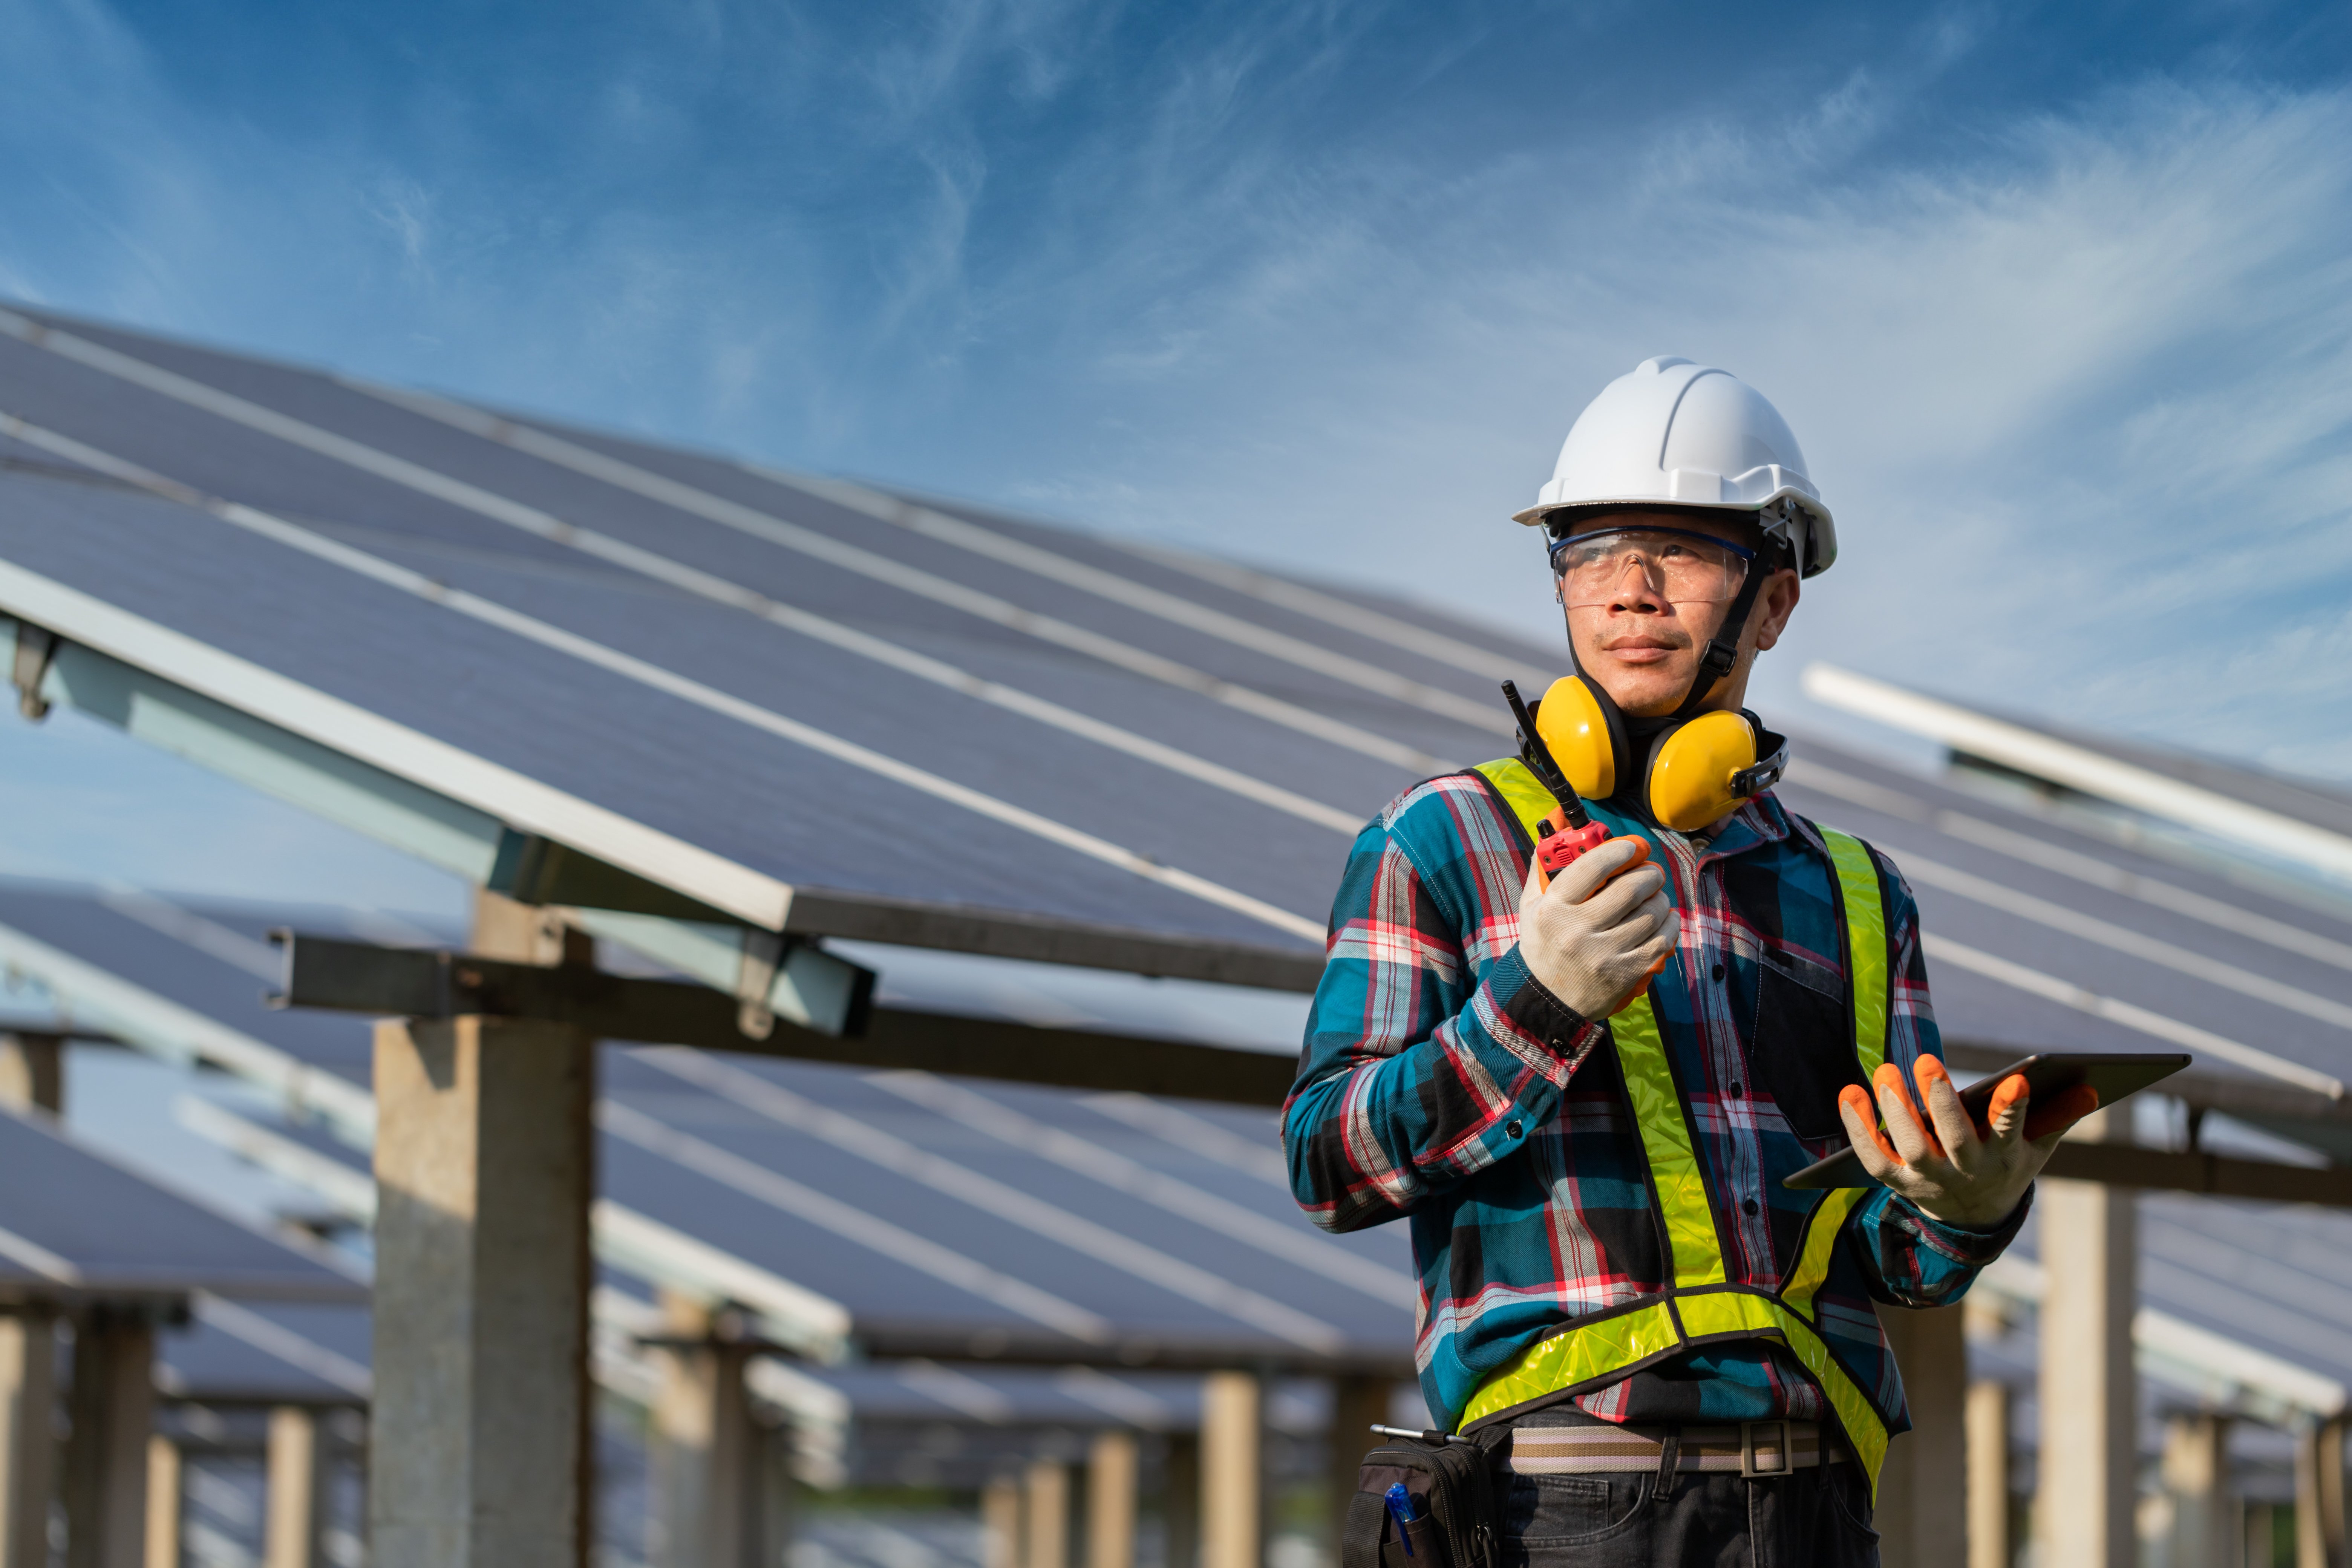 For industrial maintenance technicians, the addition of solar and EVSE can bring with it new responsibilities and a lot of questions.